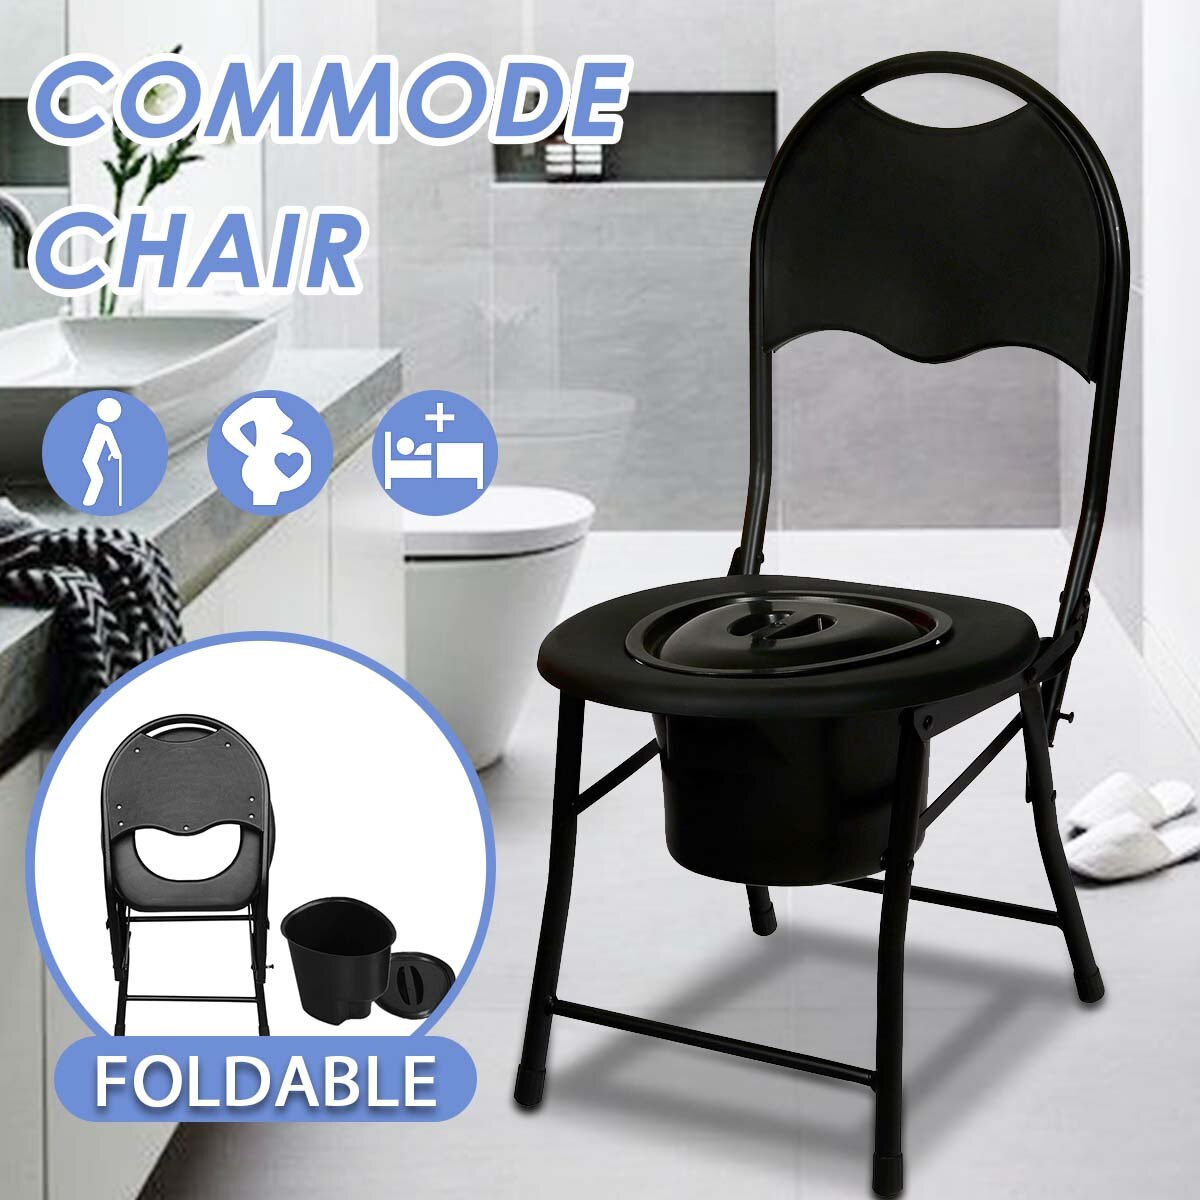 Portable Folding Potty Toilet Chair Convenient Commode Seat Shower Chair Bedside Bathroom No-slip Feet For Elderl Disabled Stool